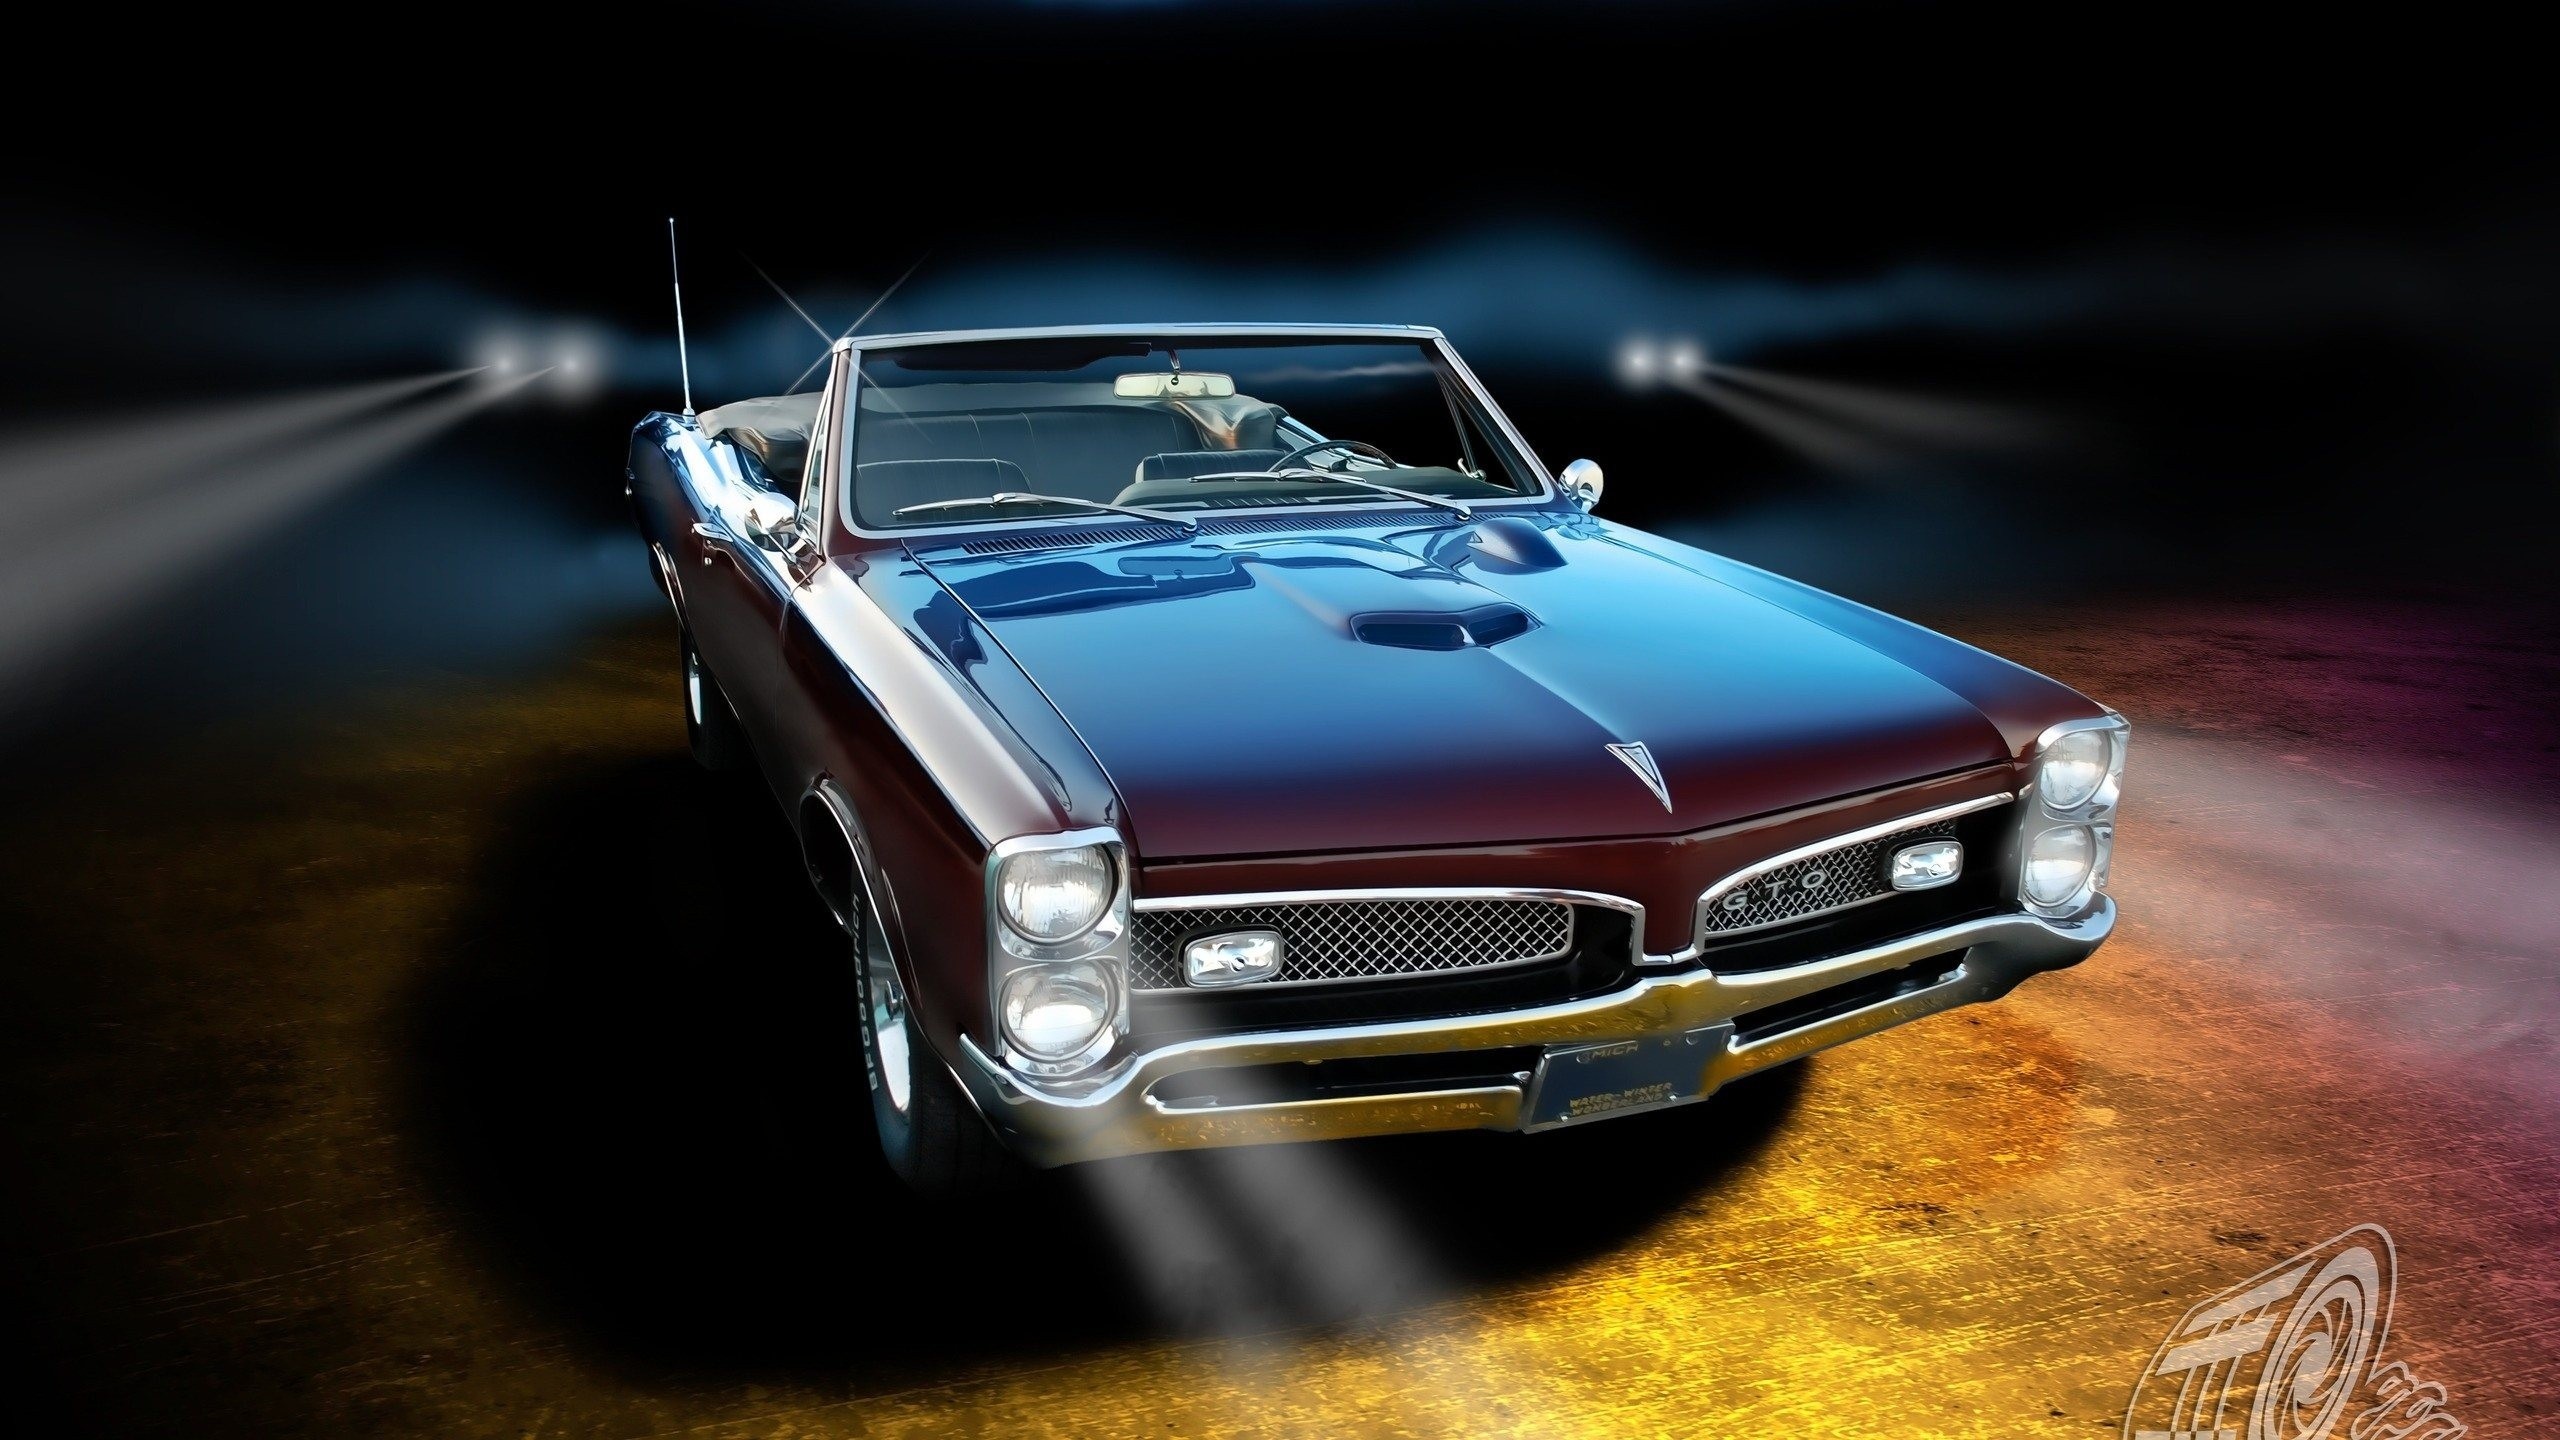 Pontiac Gto Cars And Classic Muscle Cars On Pinterest. american muscle cars wallpaper